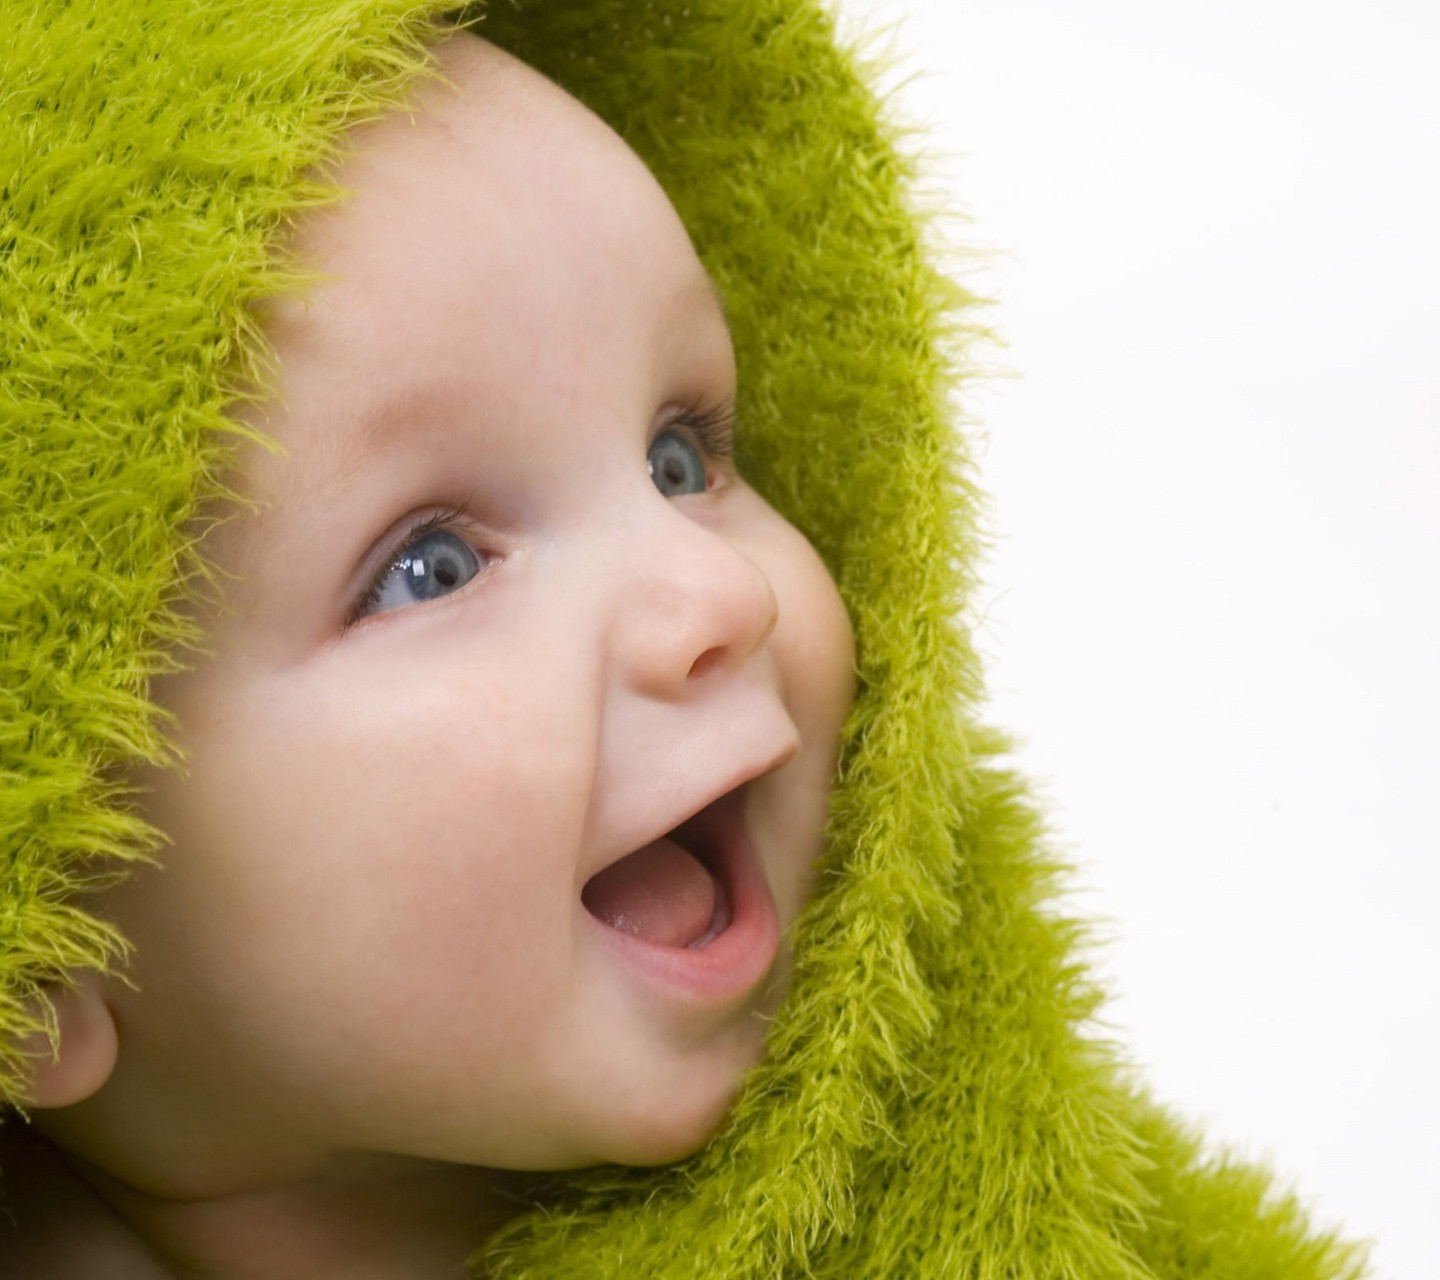 Wallpaper, face, green, baby, nose, happy, clothing, head, child, eye, cap, hairstyle, 1440x1280 px, organ, toddler, infant 1440x1280